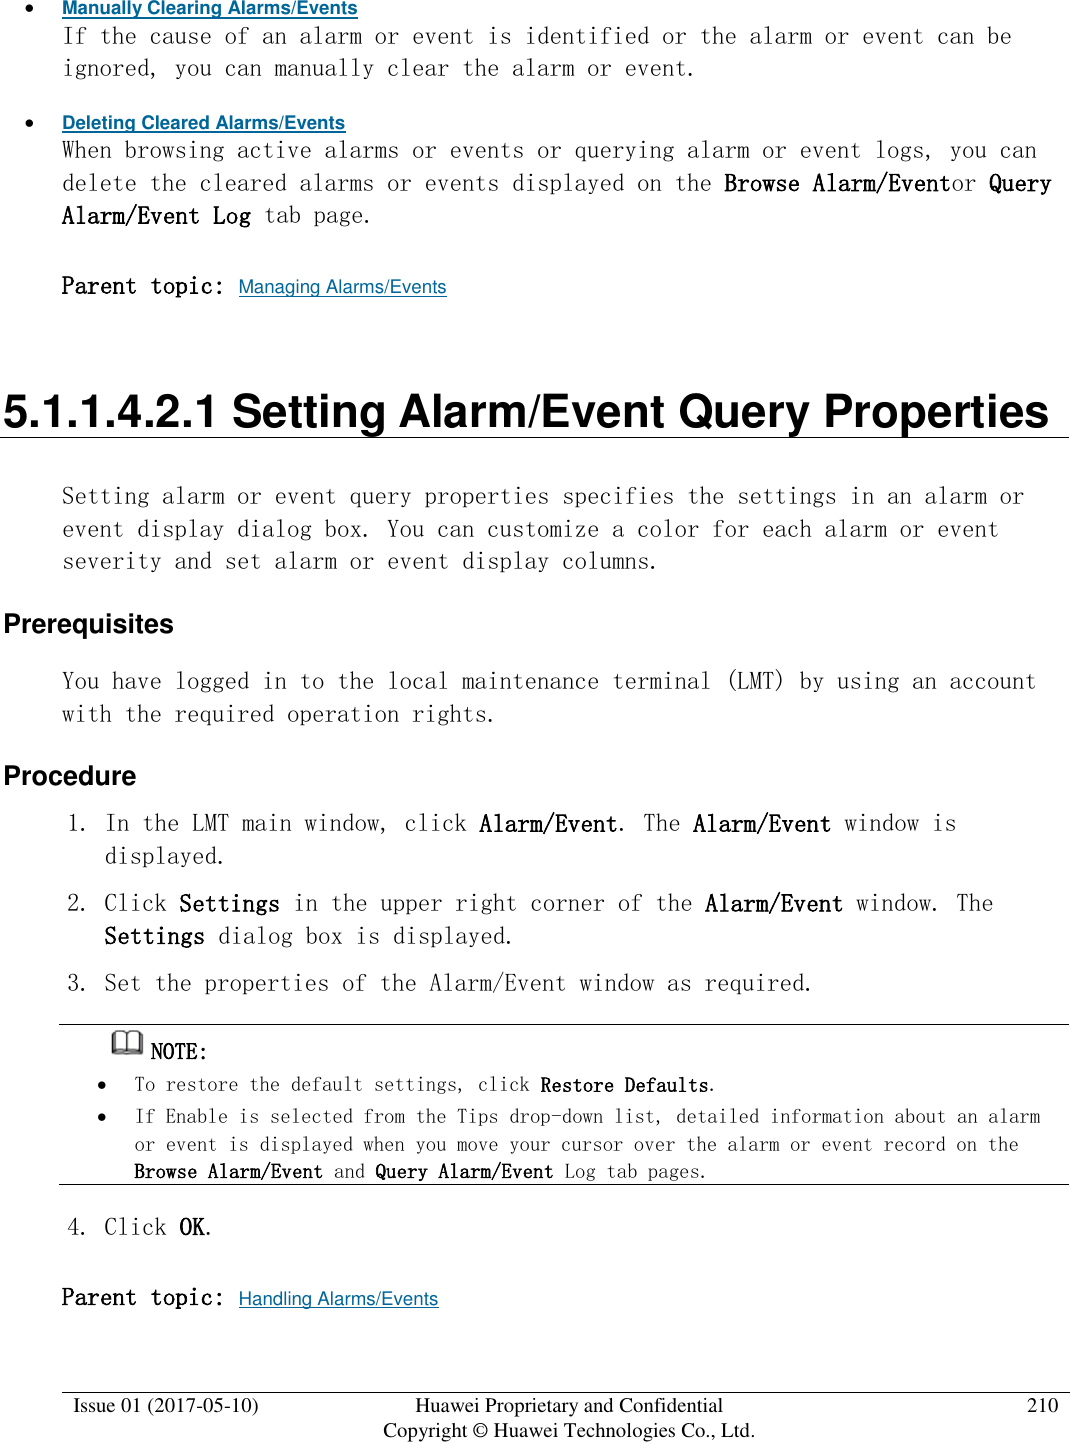  Issue 01 (2017-05-10) Huawei Proprietary and Confidential      Copyright © Huawei Technologies Co., Ltd. 210   Manually Clearing Alarms/Events If the cause of an alarm or event is identified or the alarm or event can be ignored, you can manually clear the alarm or event.   Deleting Cleared Alarms/Events When browsing active alarms or events or querying alarm or event logs, you can delete the cleared alarms or events displayed on the Browse Alarm/Eventor Query Alarm/Event Log tab page. Parent topic: Managing Alarms/Events 5.1.1.4.2.1 Setting Alarm/Event Query Properties Setting alarm or event query properties specifies the settings in an alarm or event display dialog box. You can customize a color for each alarm or event severity and set alarm or event display columns. Prerequisites You have logged in to the local maintenance terminal (LMT) by using an account with the required operation rights.  Procedure 1. In the LMT main window, click Alarm/Event. The Alarm/Event window is displayed.  2. Click Settings in the upper right corner of the Alarm/Event window. The Settings dialog box is displayed. 3. Set the properties of the Alarm/Event window as required.  NOTE:   To restore the default settings, click Restore Defaults.   If Enable is selected from the Tips drop-down list, detailed information about an alarm or event is displayed when you move your cursor over the alarm or event record on the Browse Alarm/Event and Query Alarm/Event Log tab pages. 4. Click OK. Parent topic: Handling Alarms/Events 